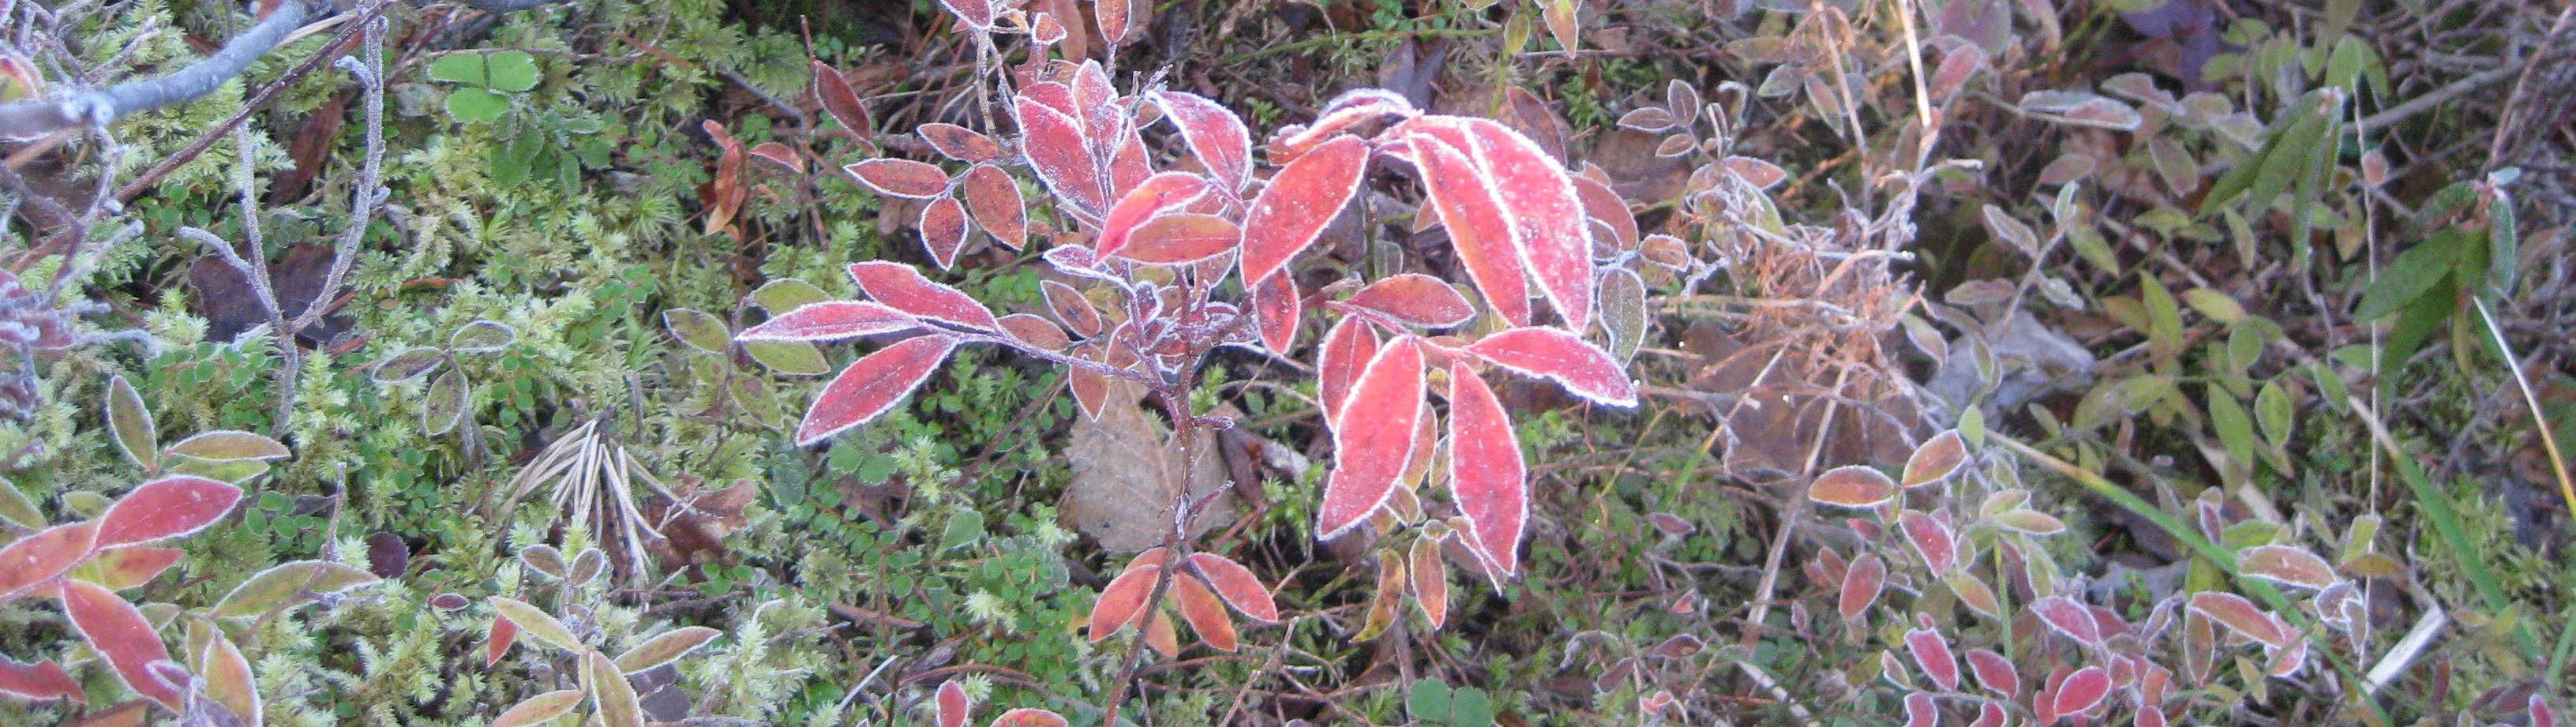 Red forest floor vegetation with frost on edges of leaves